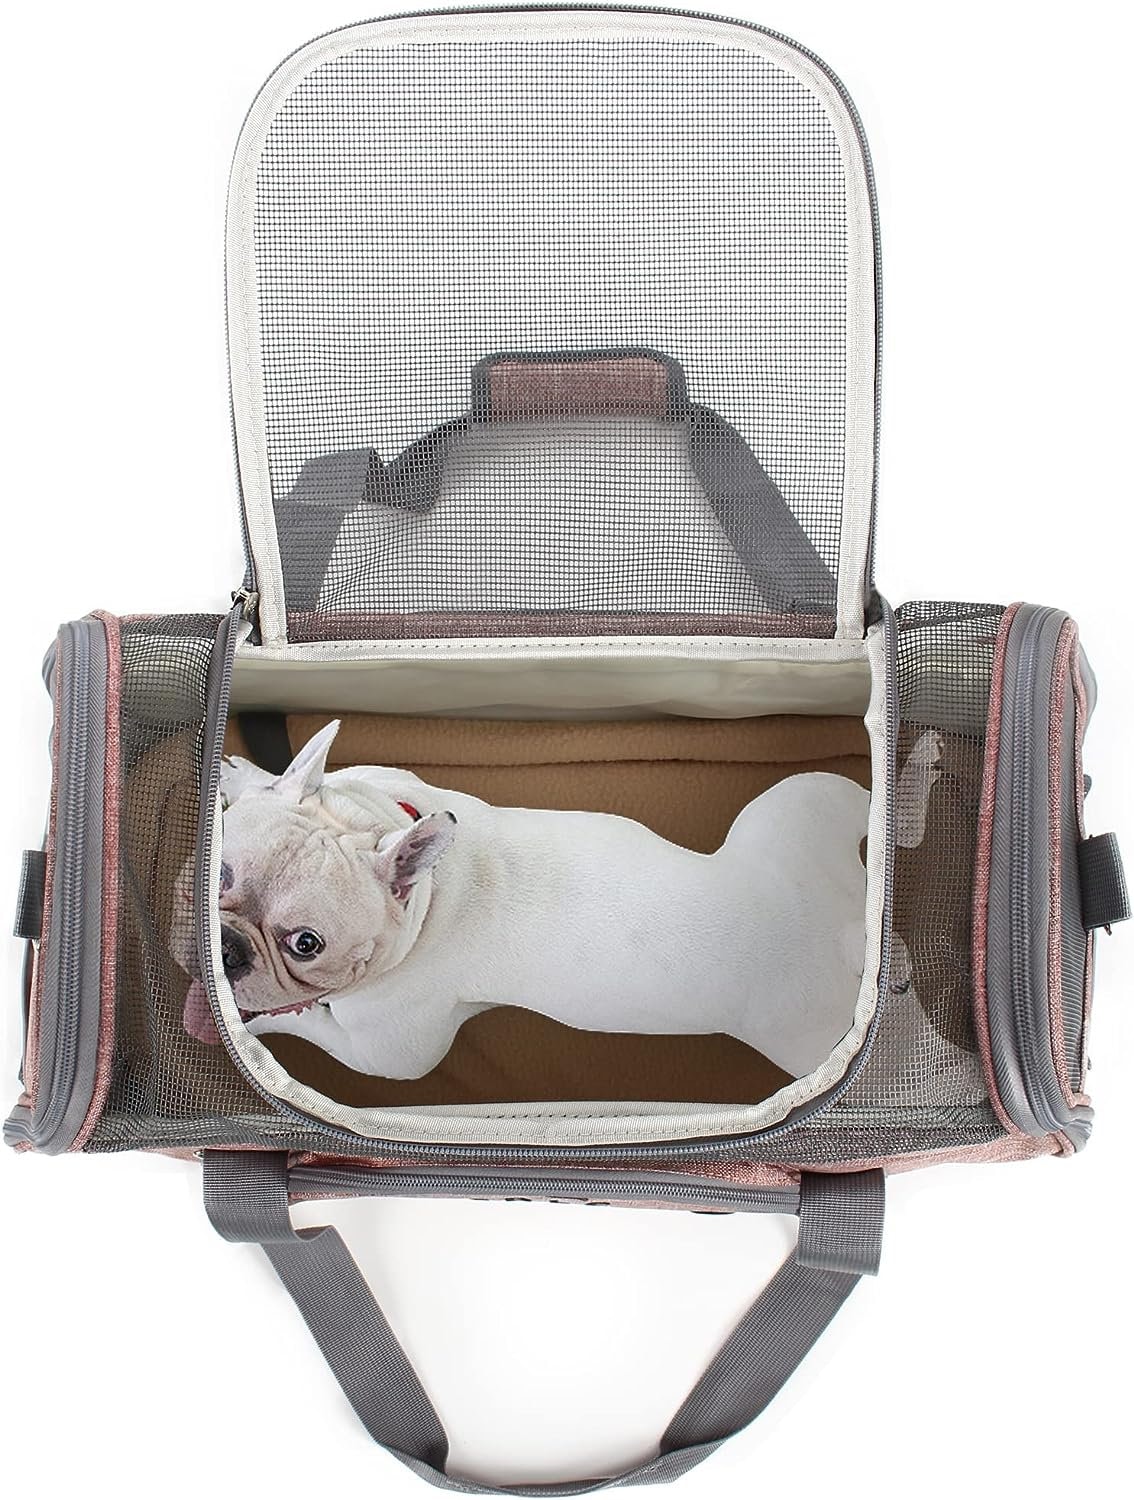  BELLAMORE GIFT Pet Carrier Airline Approved Travel